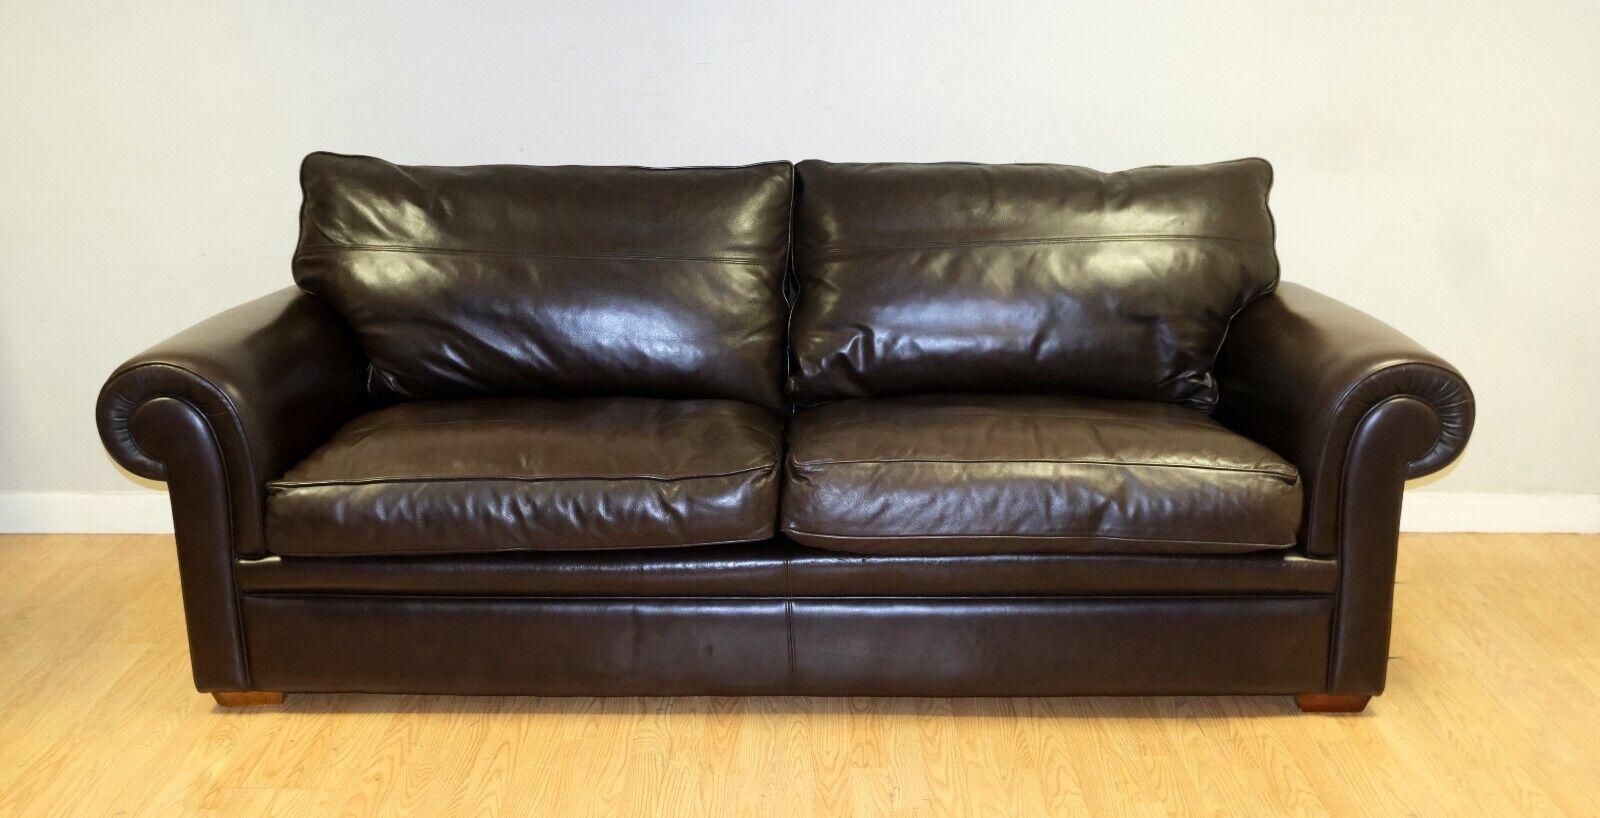 STUNNiNG DURESTA GARRICK THREE SEATER BROWN LEATHER SOFA ON CLASSIC SCROLL ARMS For Sale 3